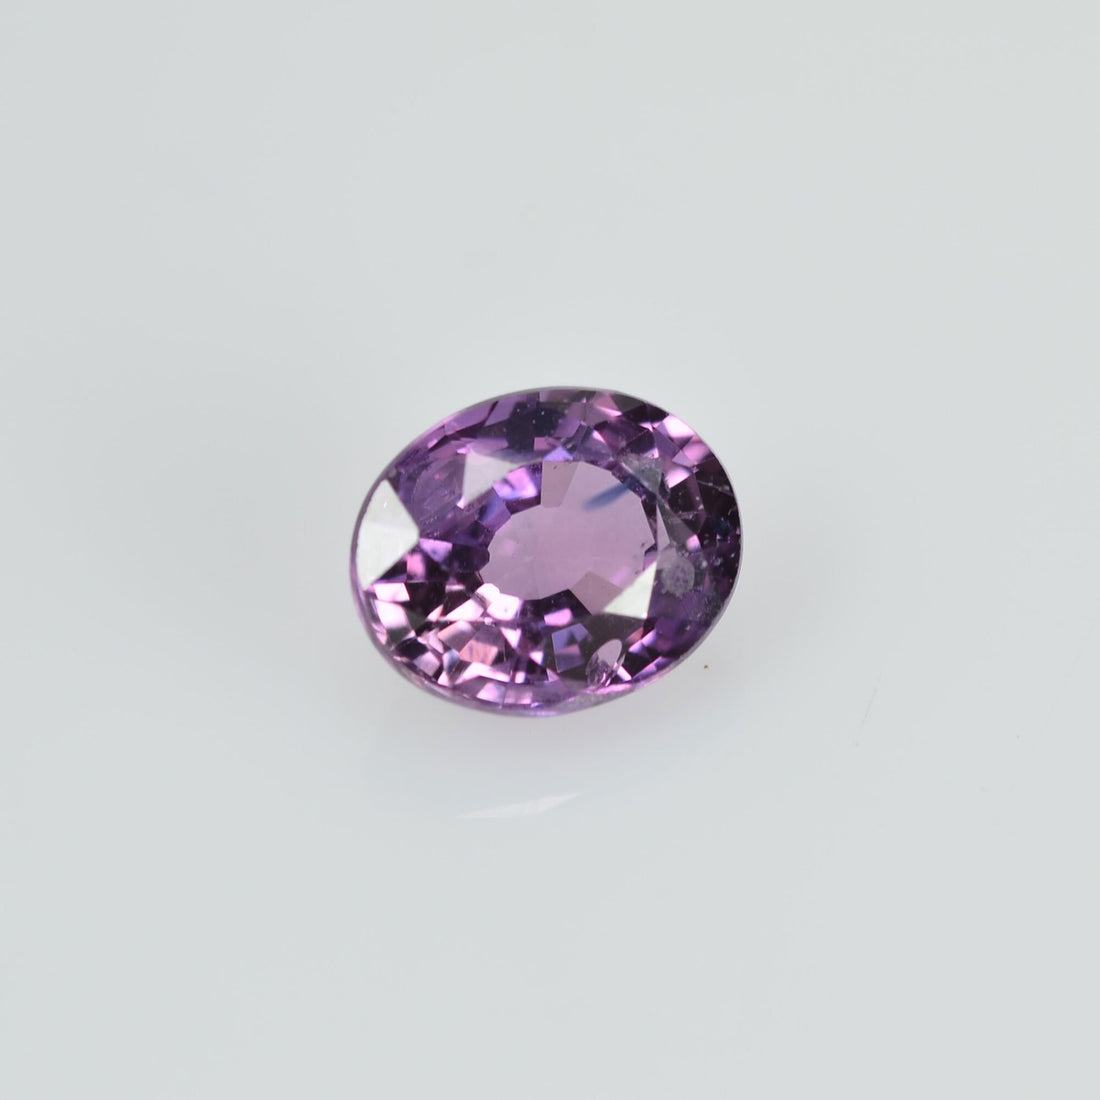 0.46 cts Natural Purple Sapphire Loose Gemstone Oval Cut